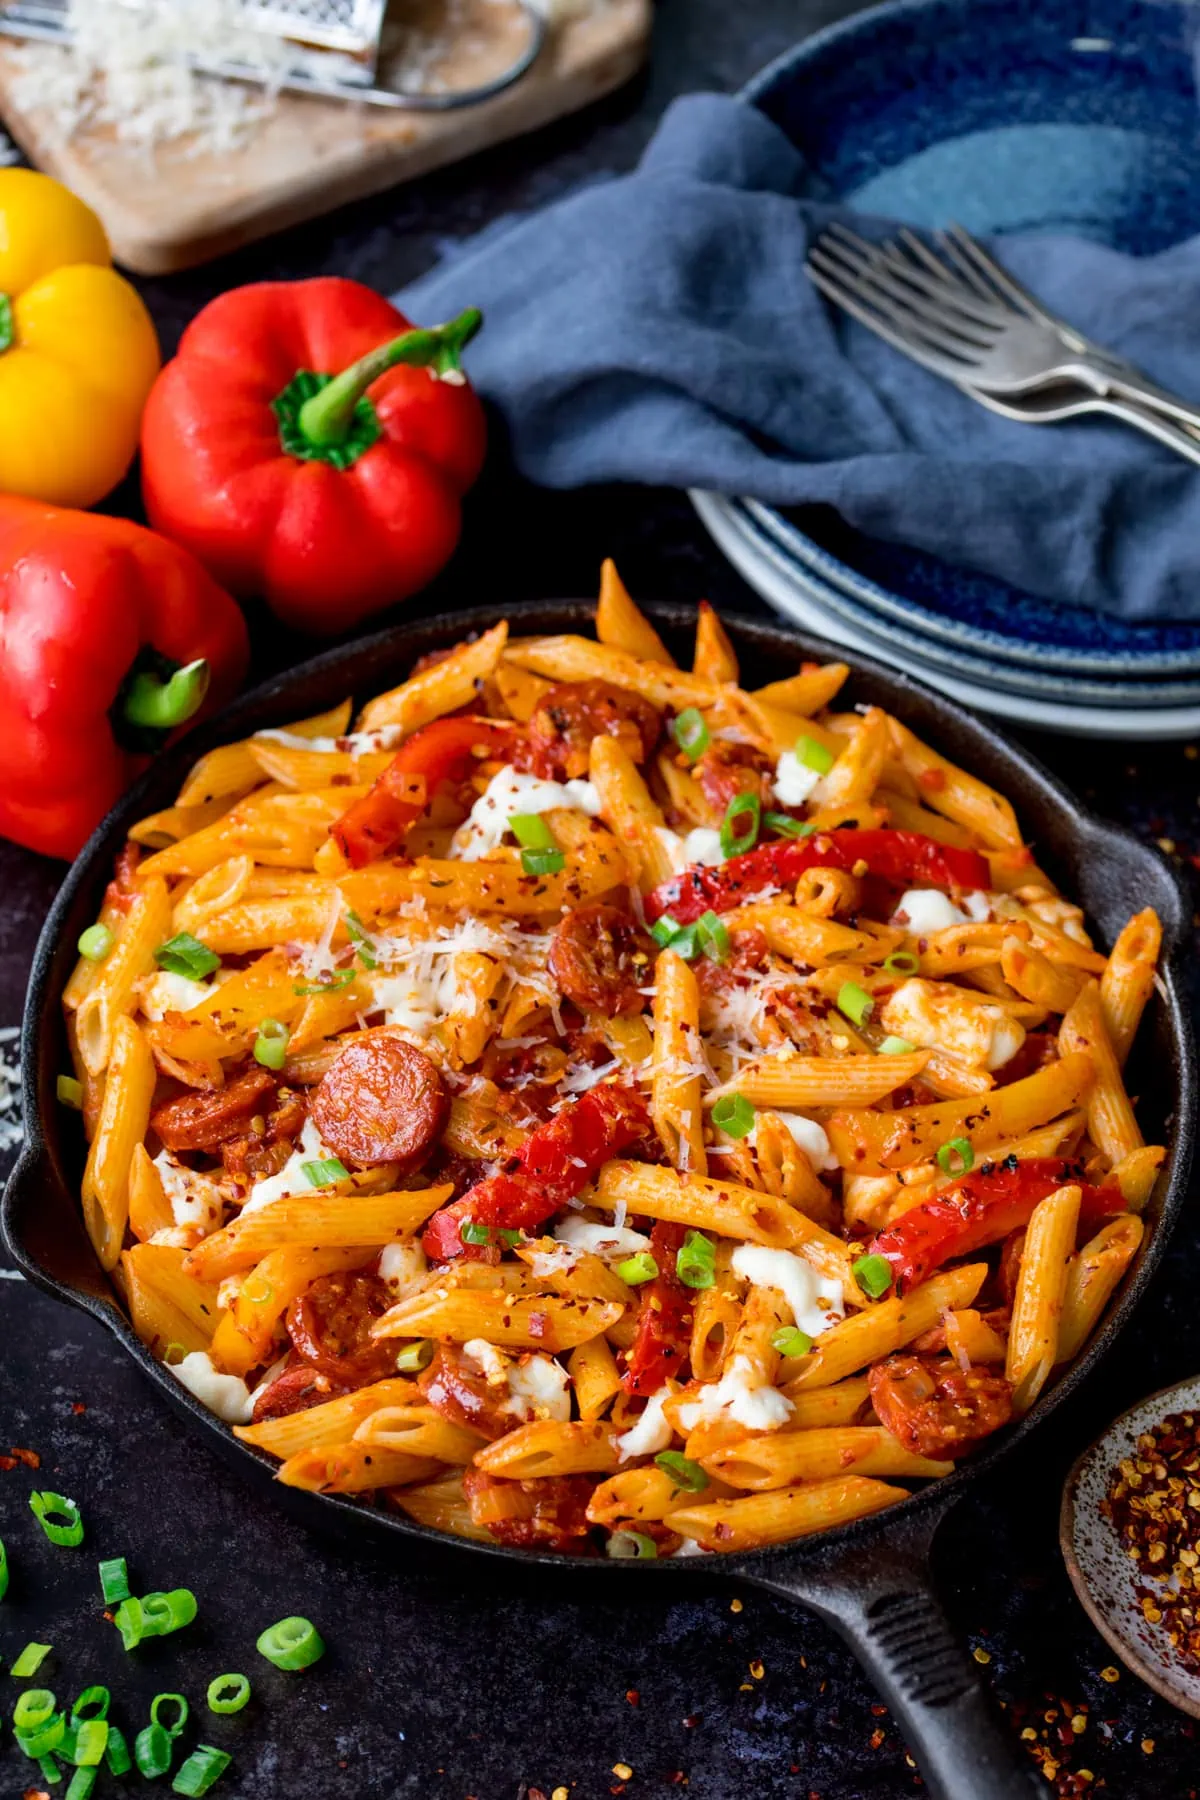 Penne arrabbiata in a pan with mozzarella and chorizo. The pan is on a dark background and there are ingredients scattered around.